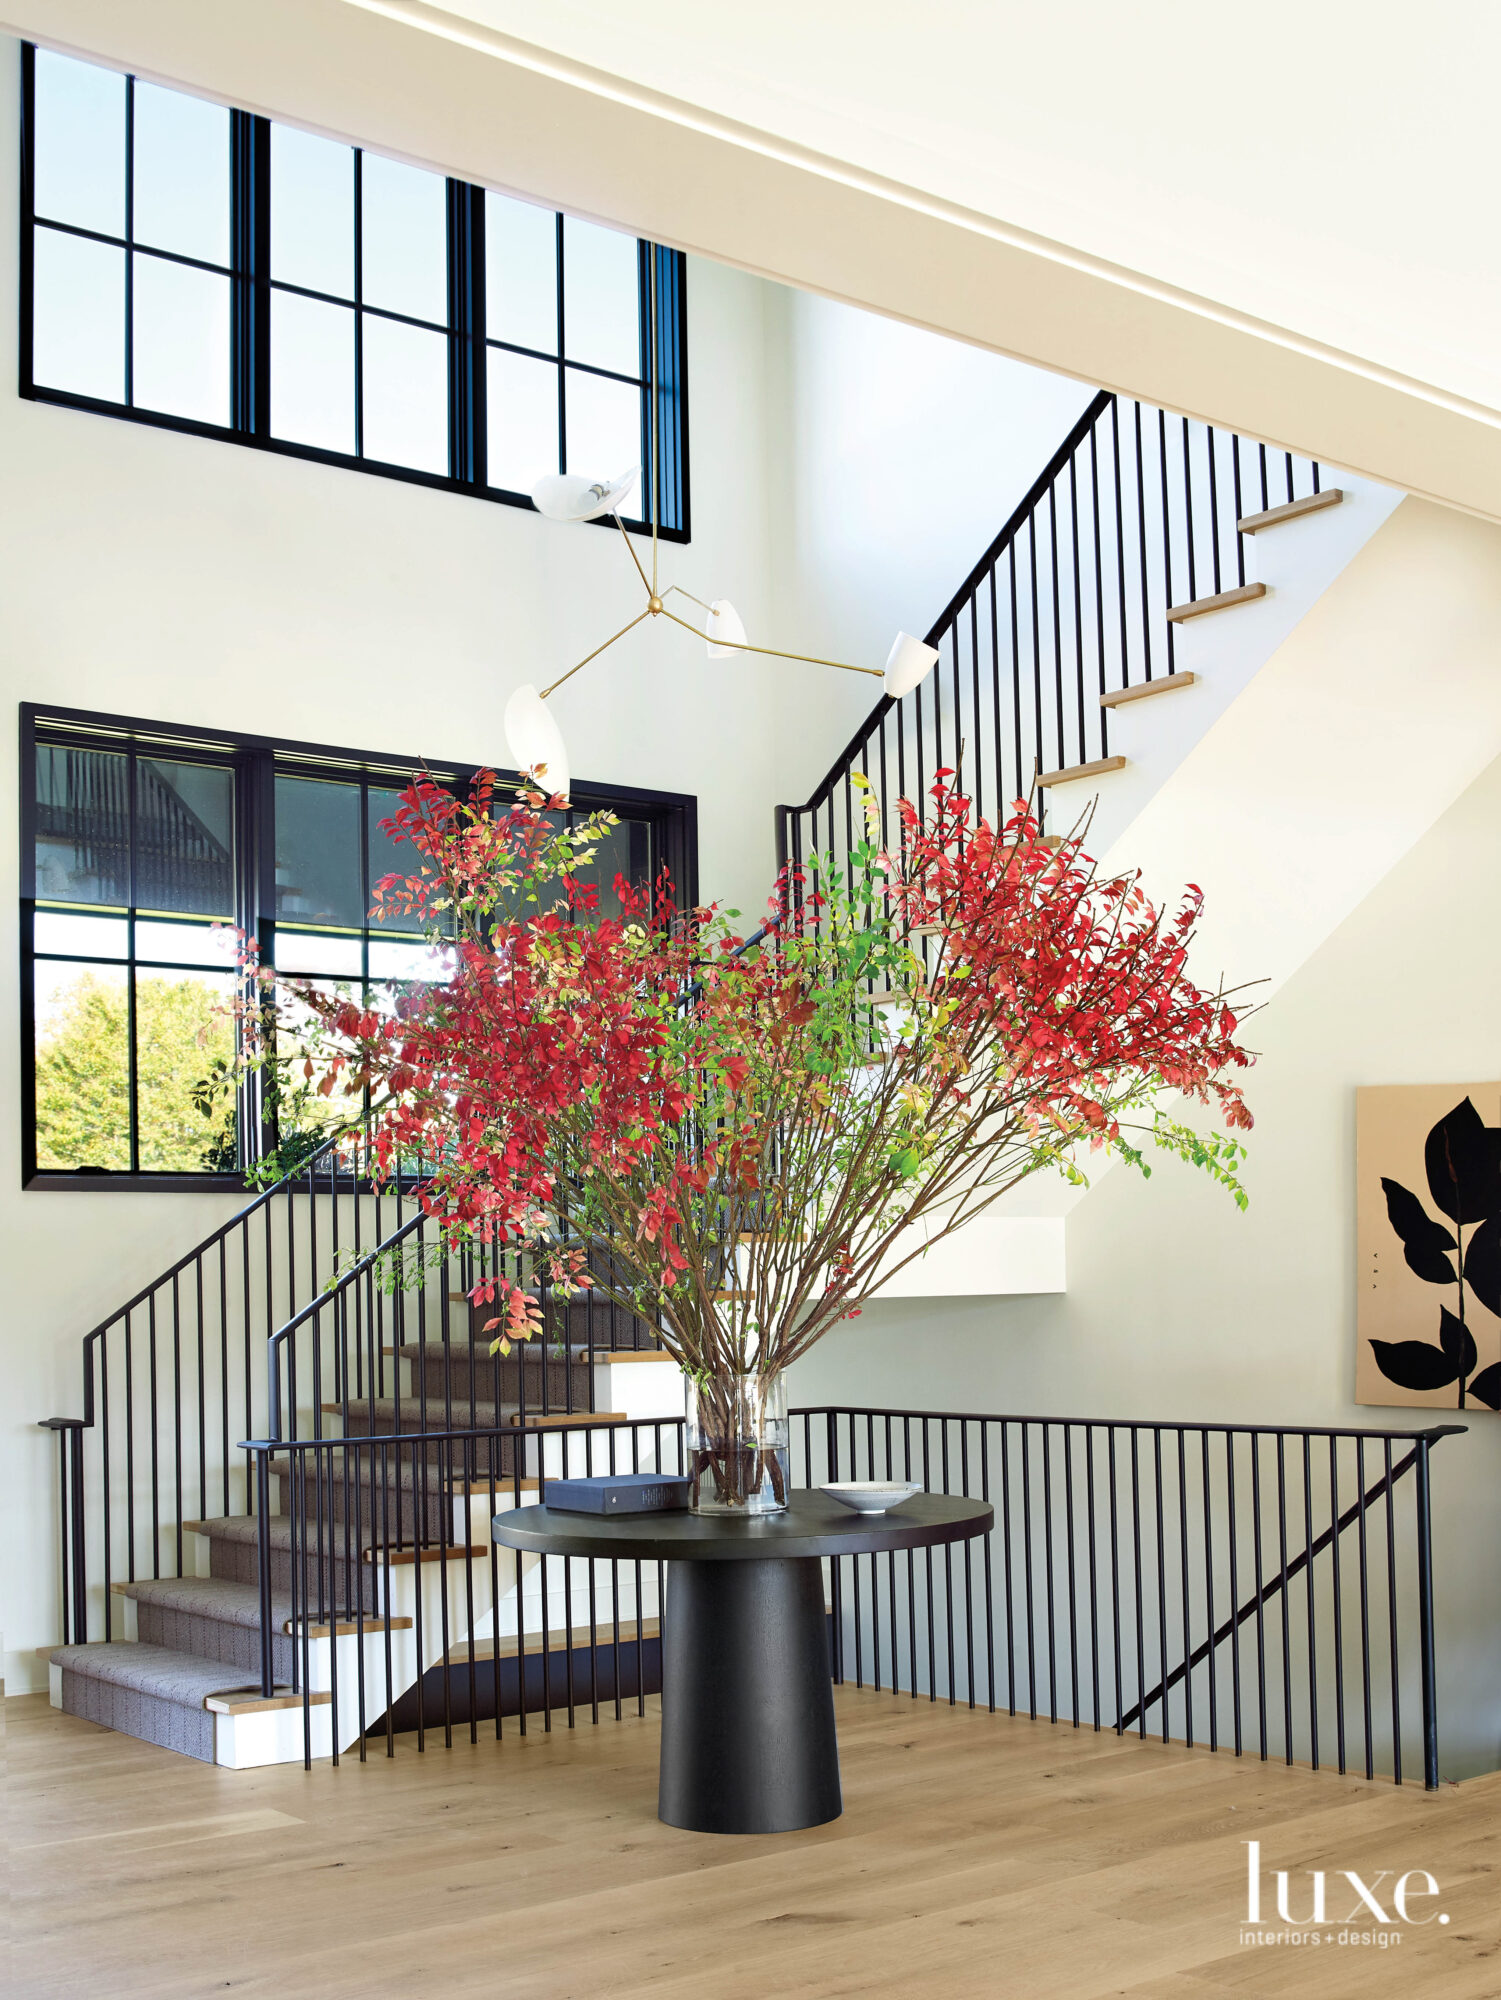 Black and white colors contrast in the entryway